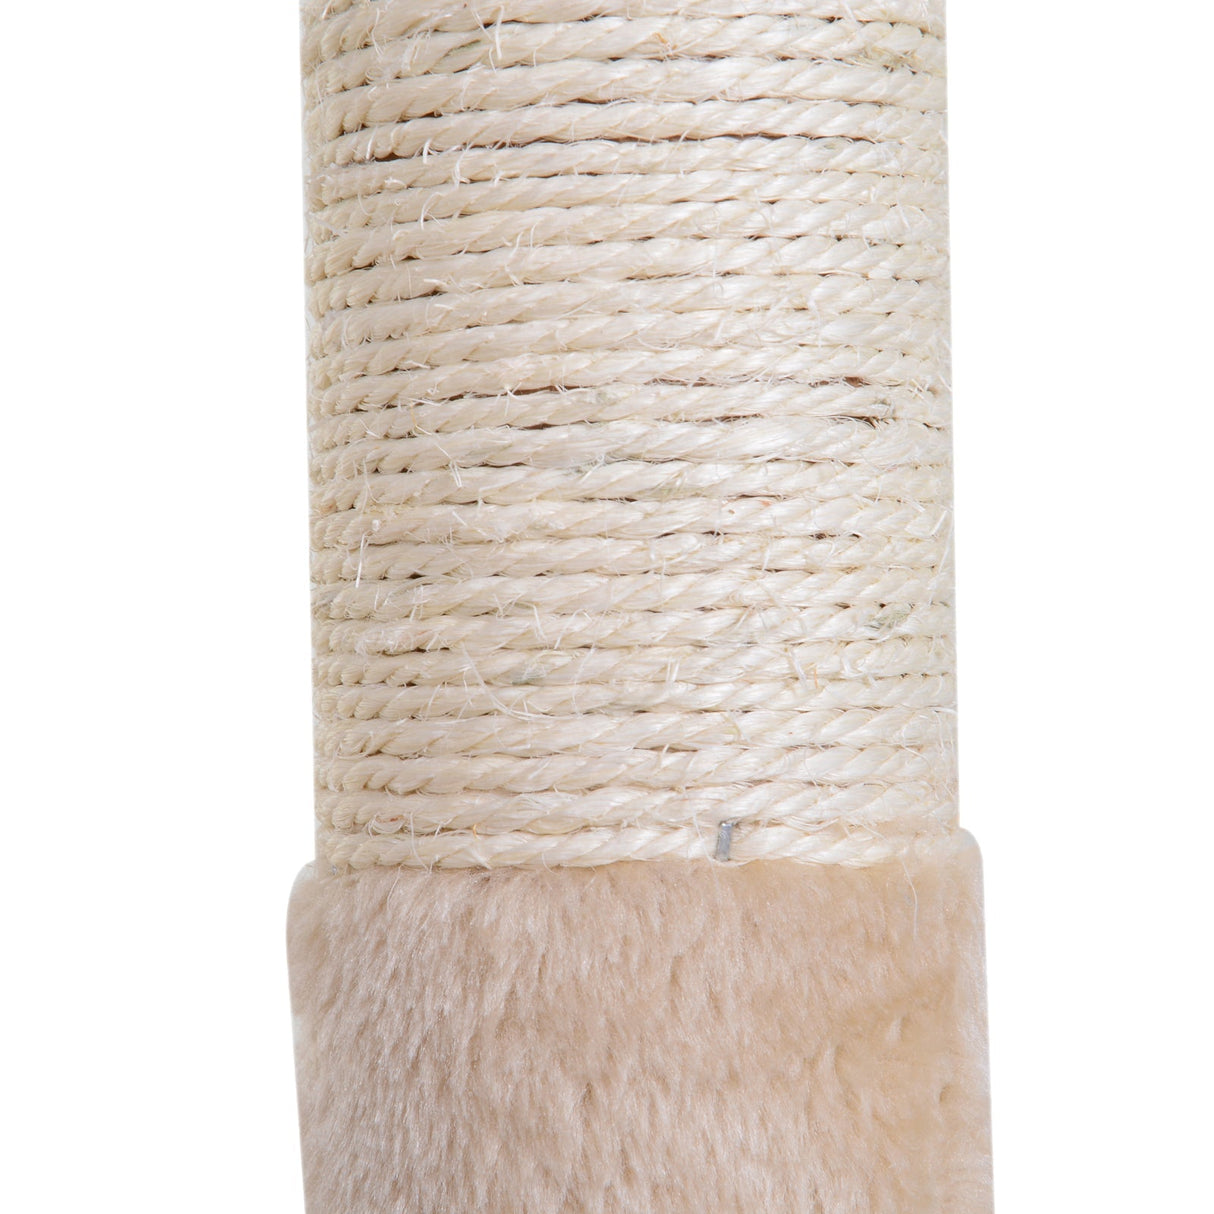 70cm Cat Tree for Indoor Cats Durable Natural Sisal Scratching Posts Hammock Bed Kitty Activity Center, PawHut, Beige